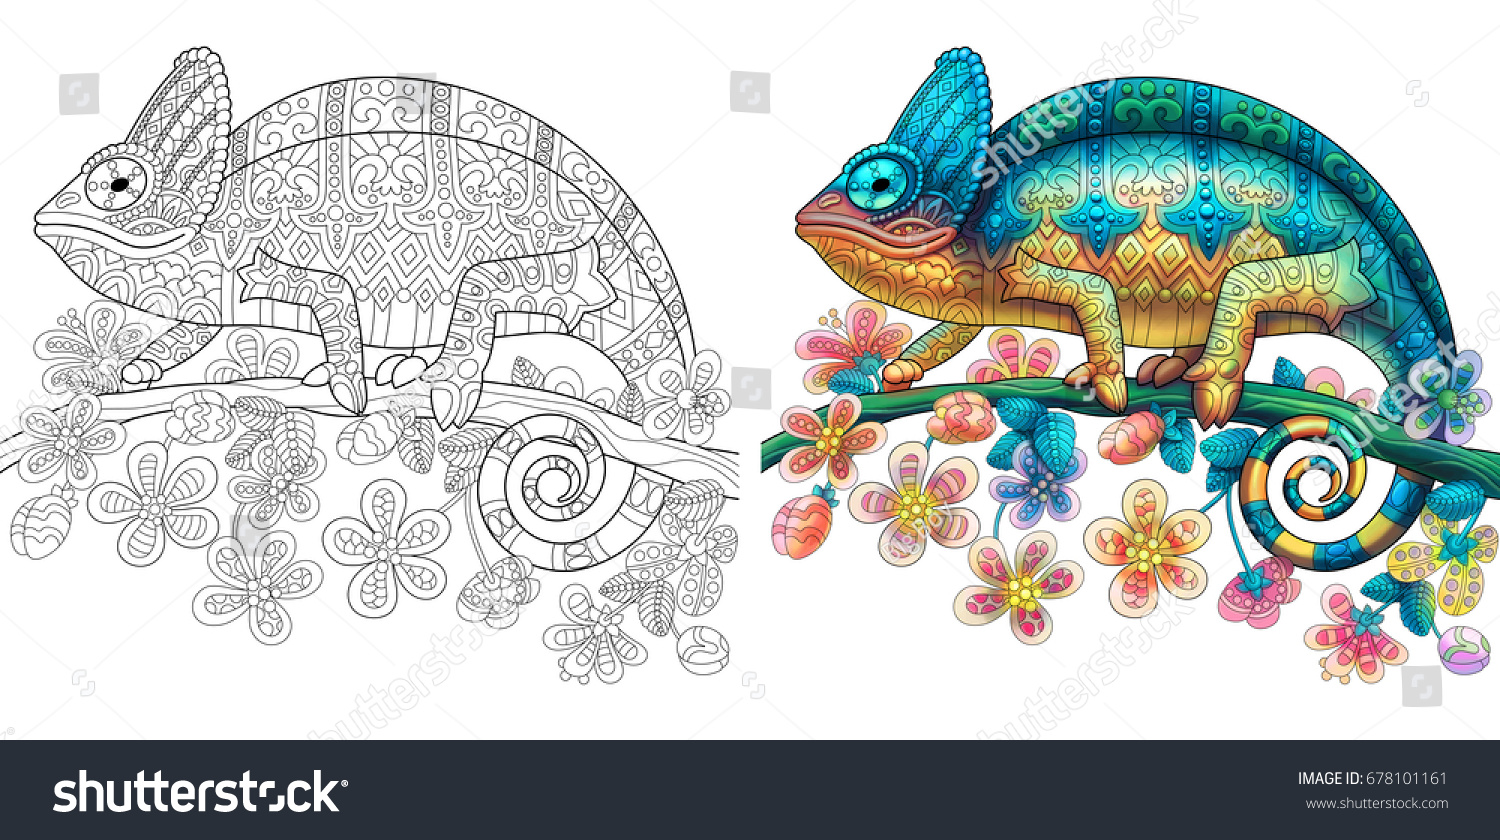 SVG of Coloring page of chameleon lizard. Colorless and color samples for book cover. Freehand sketch drawing for adult antistress colouring with doodle and zentangle elements. svg